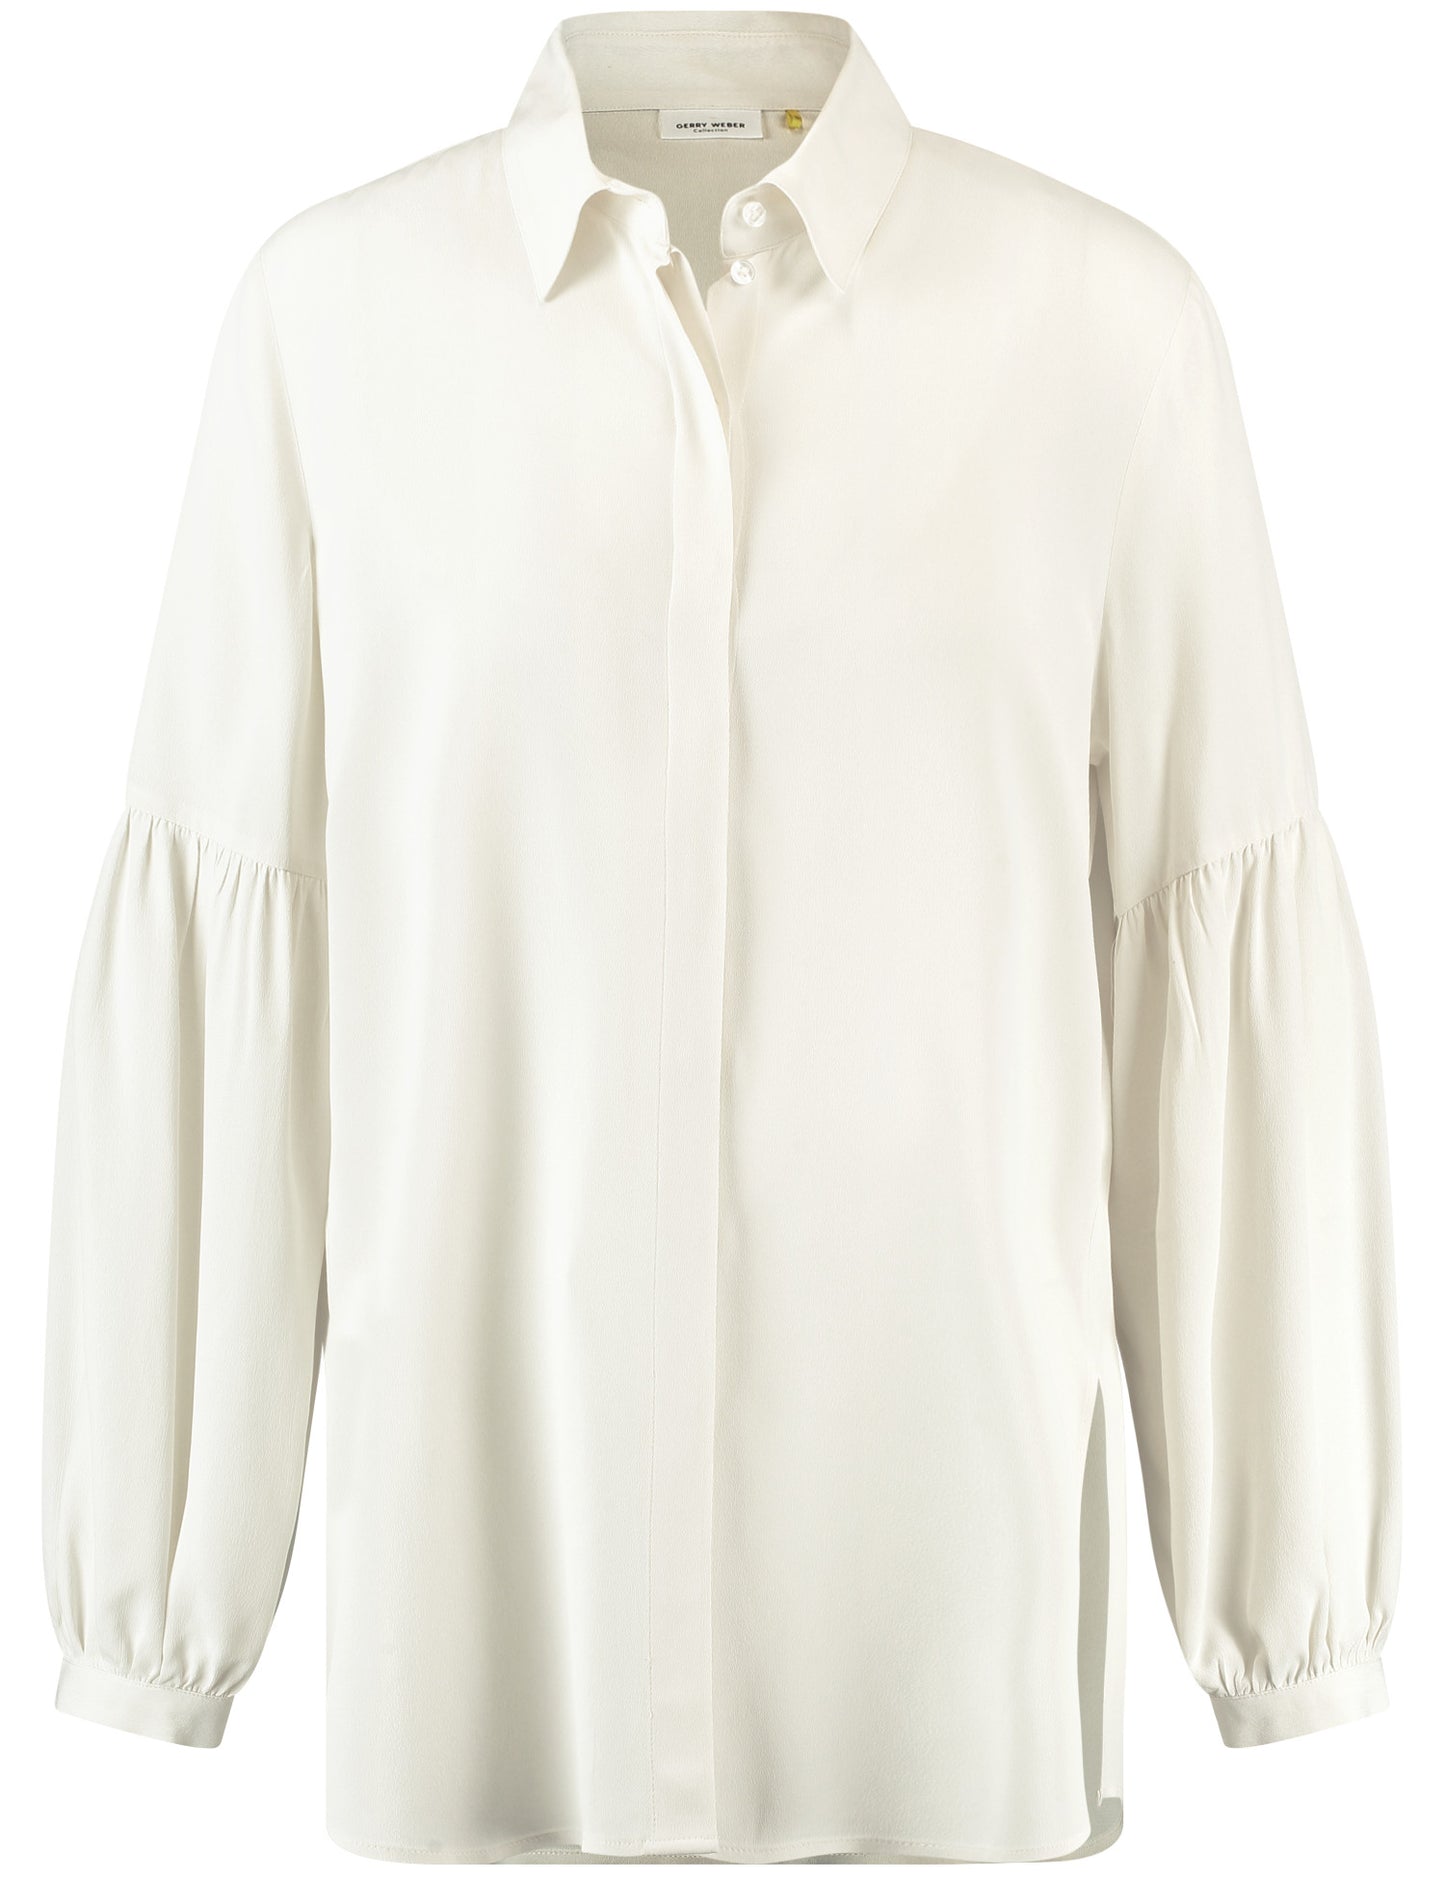 Blouse with flounced sleeves